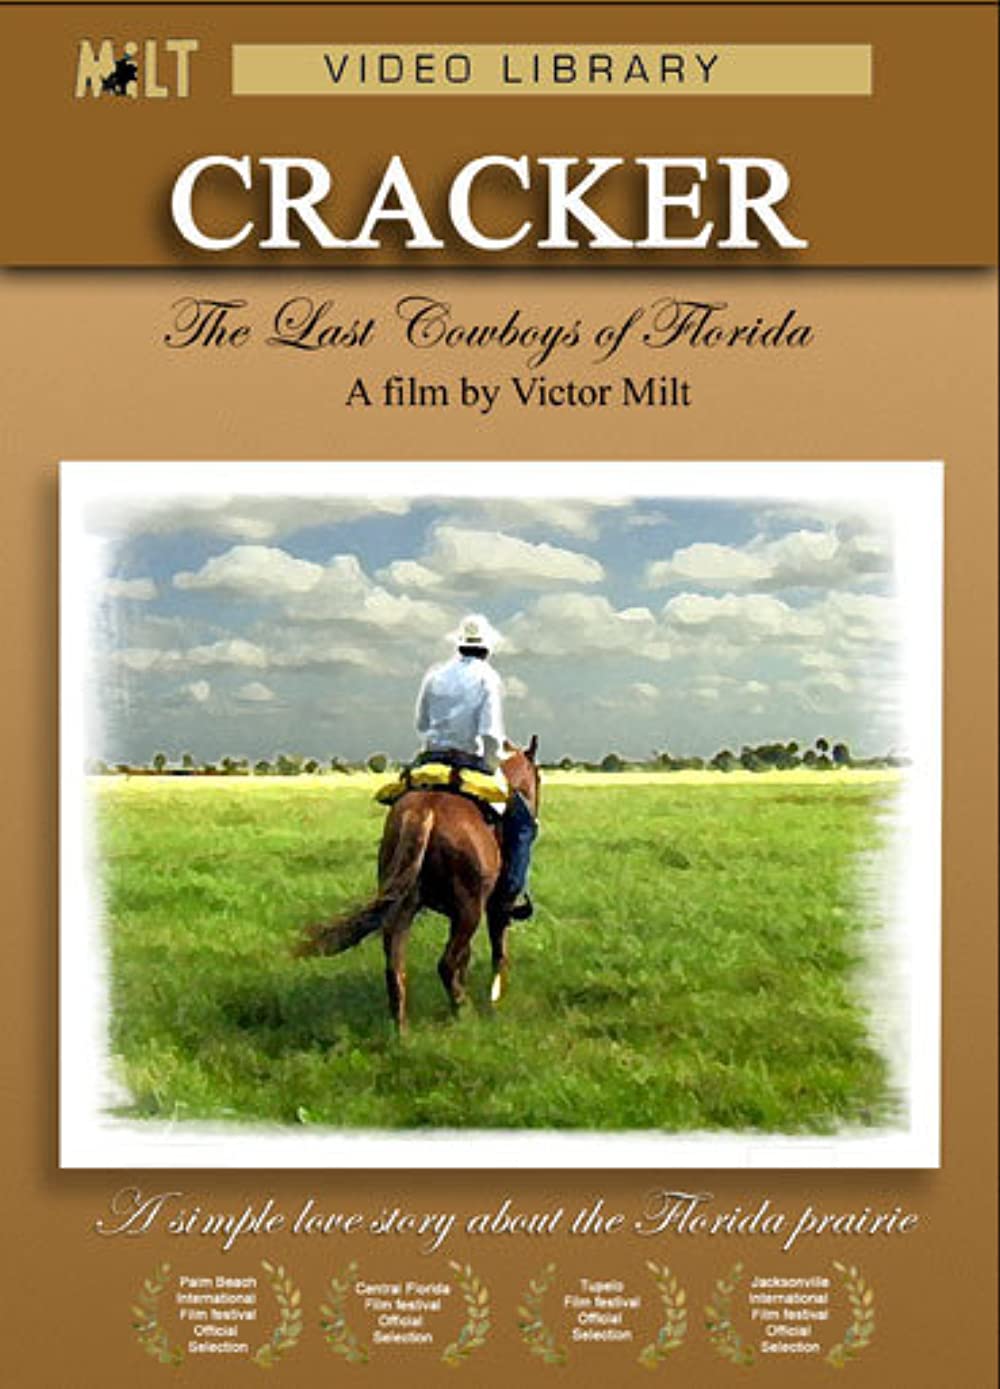 Title of movie with watercolor painting of a cowboy riding a horse on a grassy field.